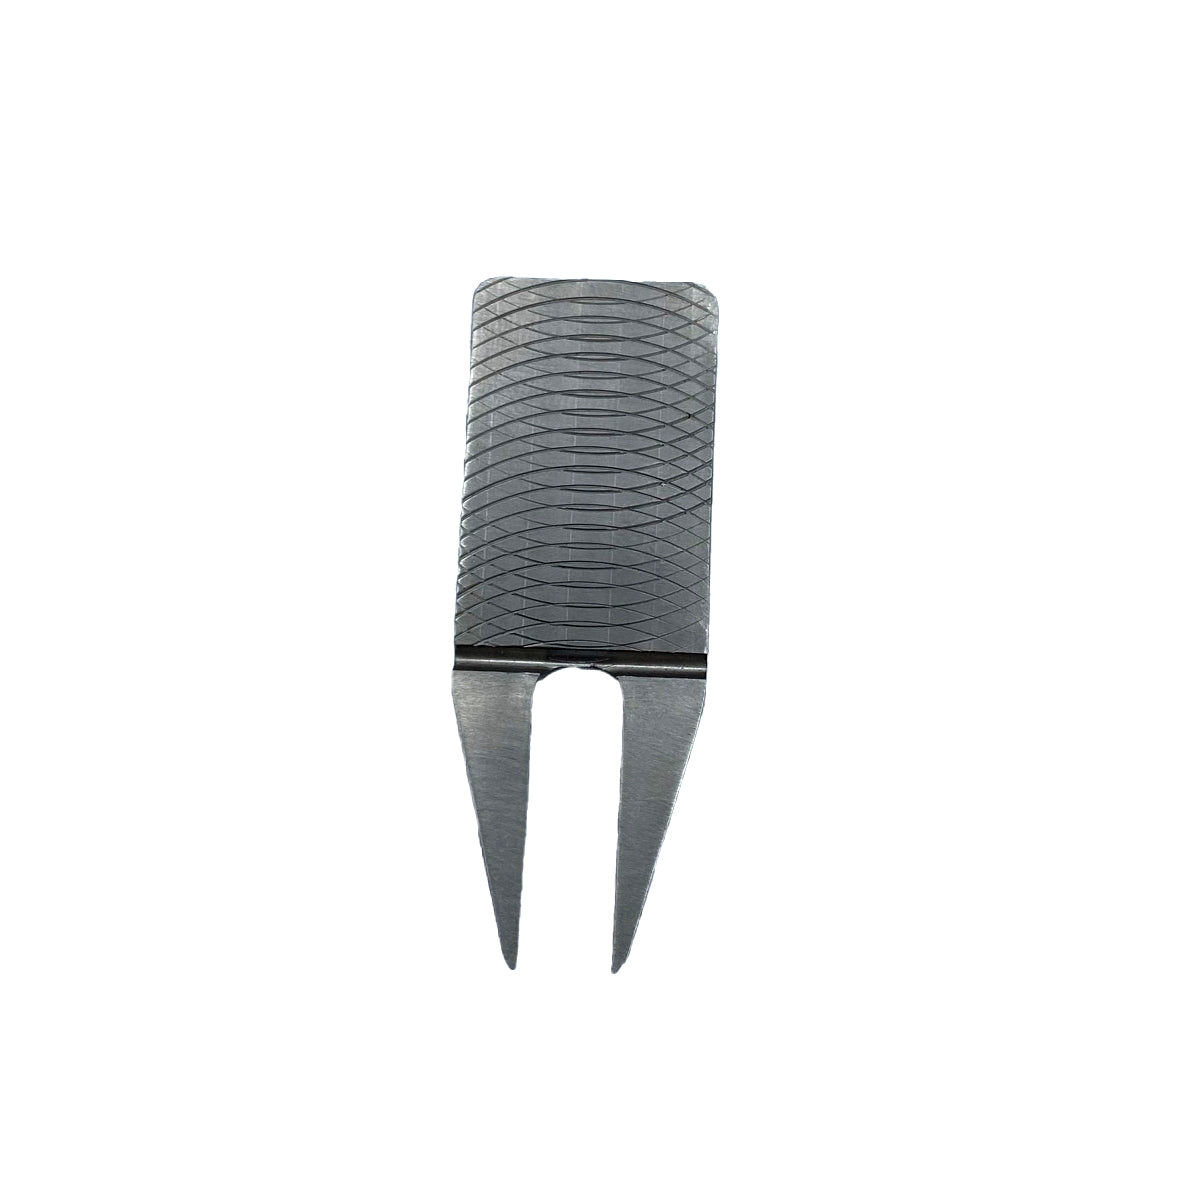 Tour Milled Stainless Steel Divot Repair Tool